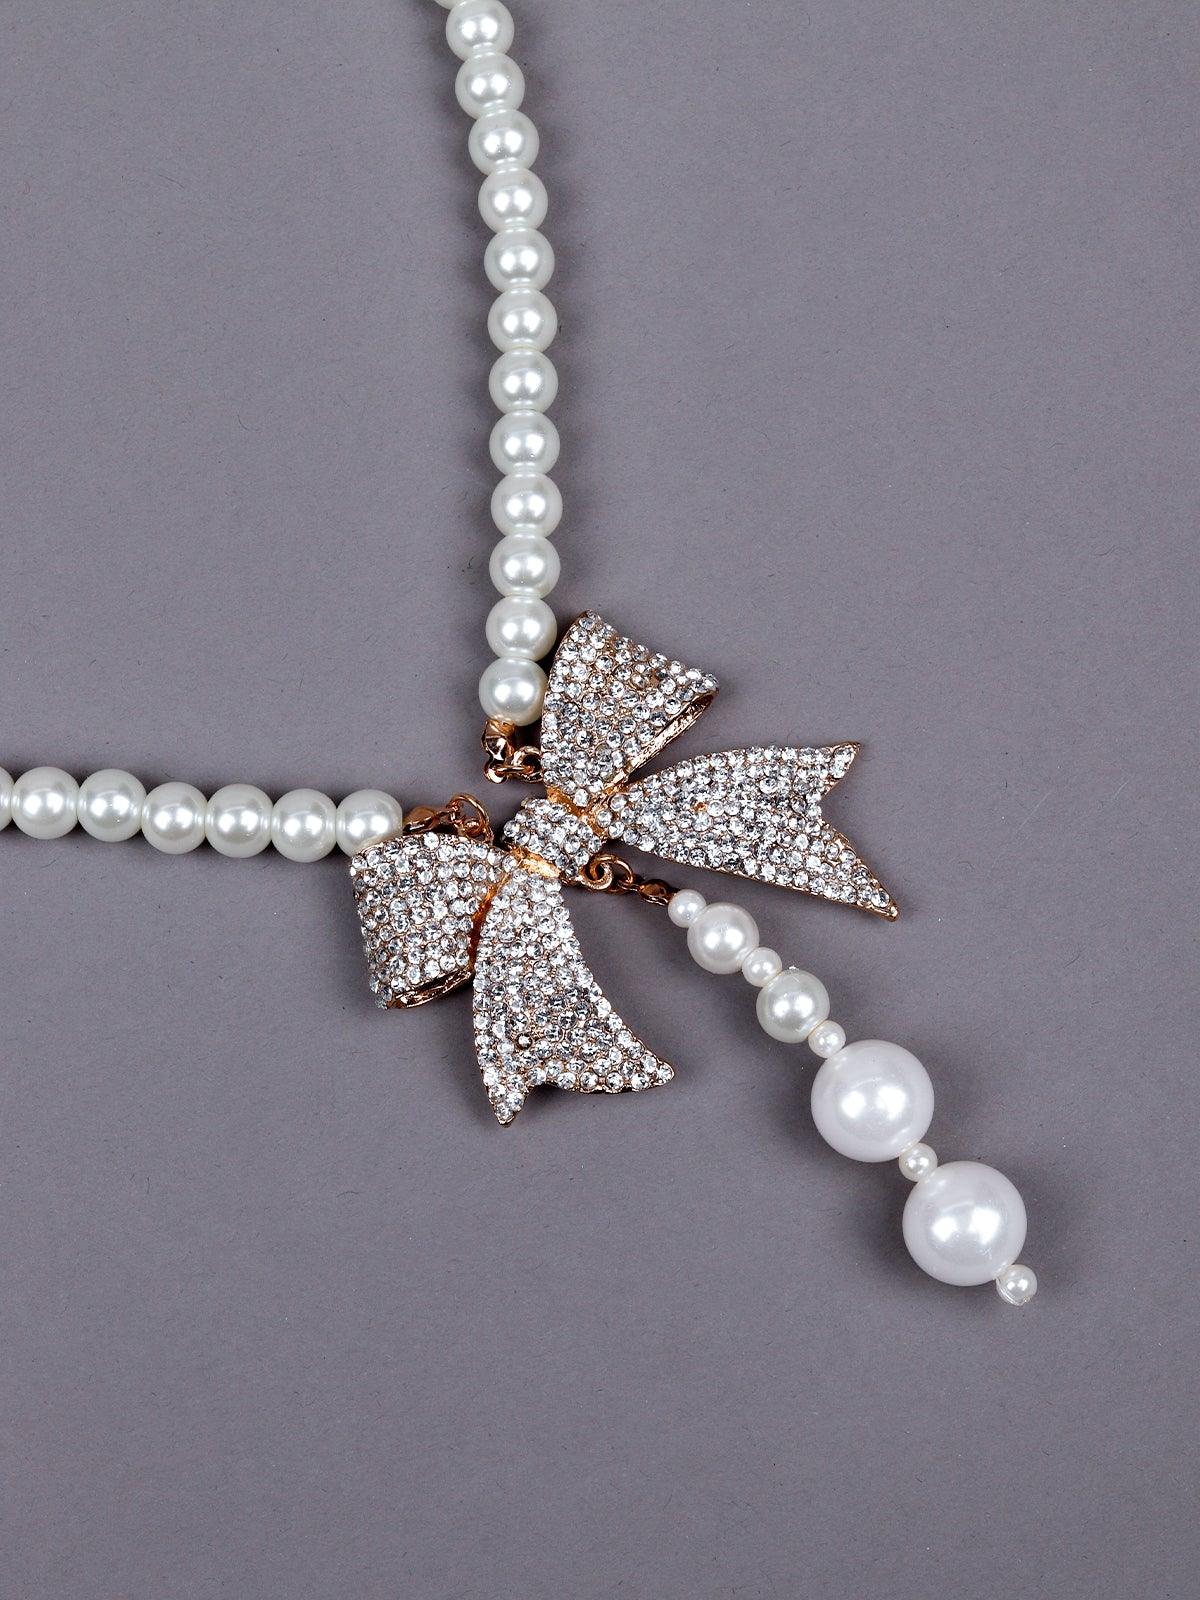 Sophisticated White Pearl Necklace With A Stunning Bow - Odette